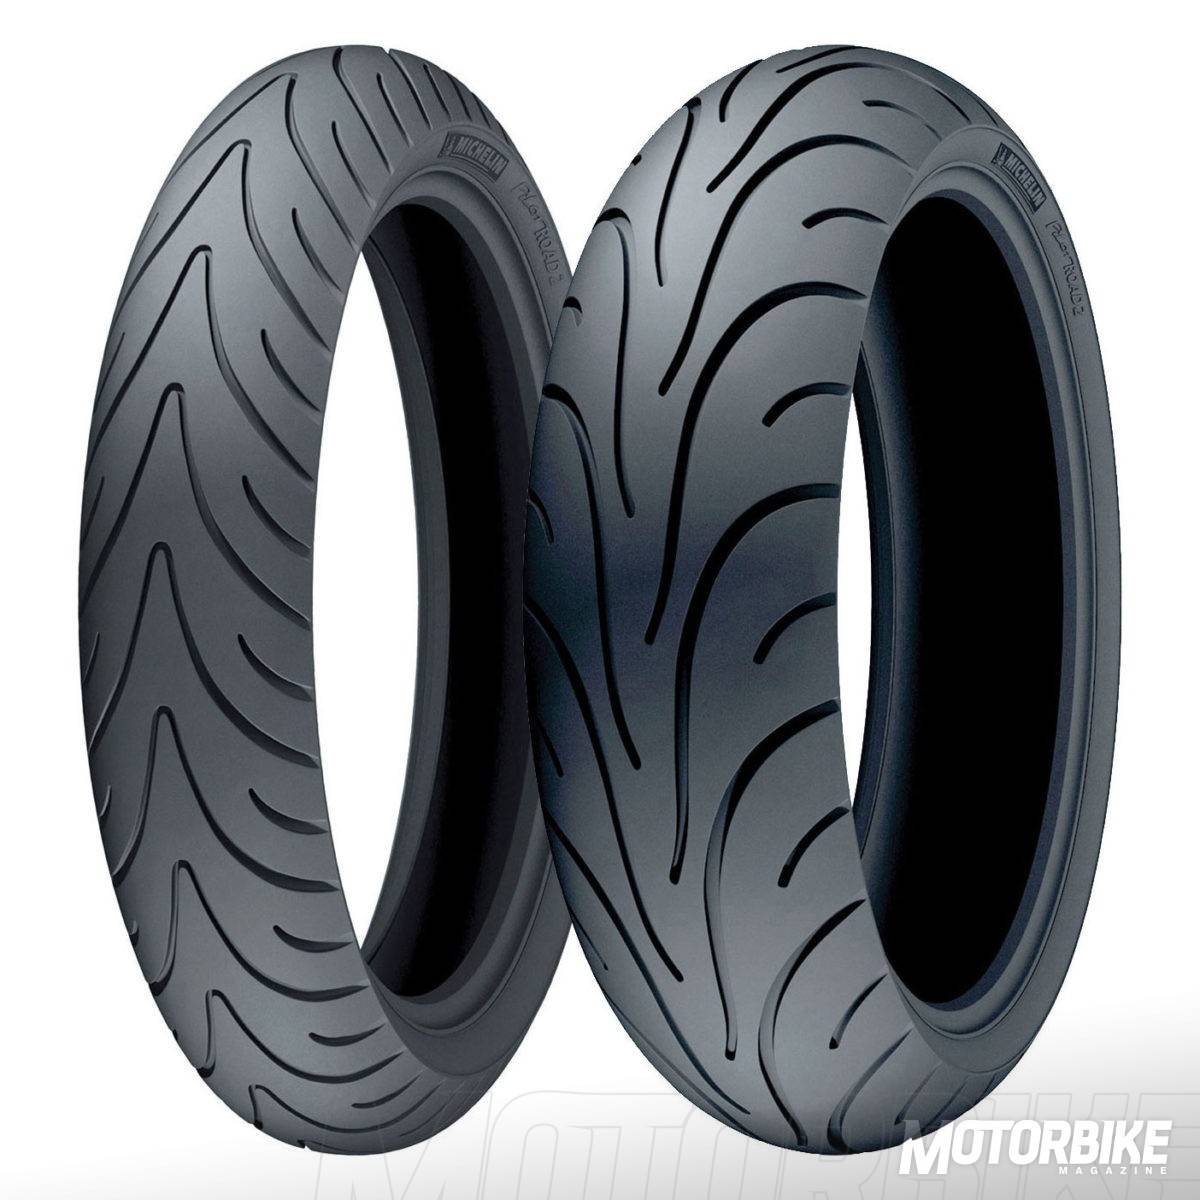 Michelin Pilot Road 2 - Tire reviews and ratings